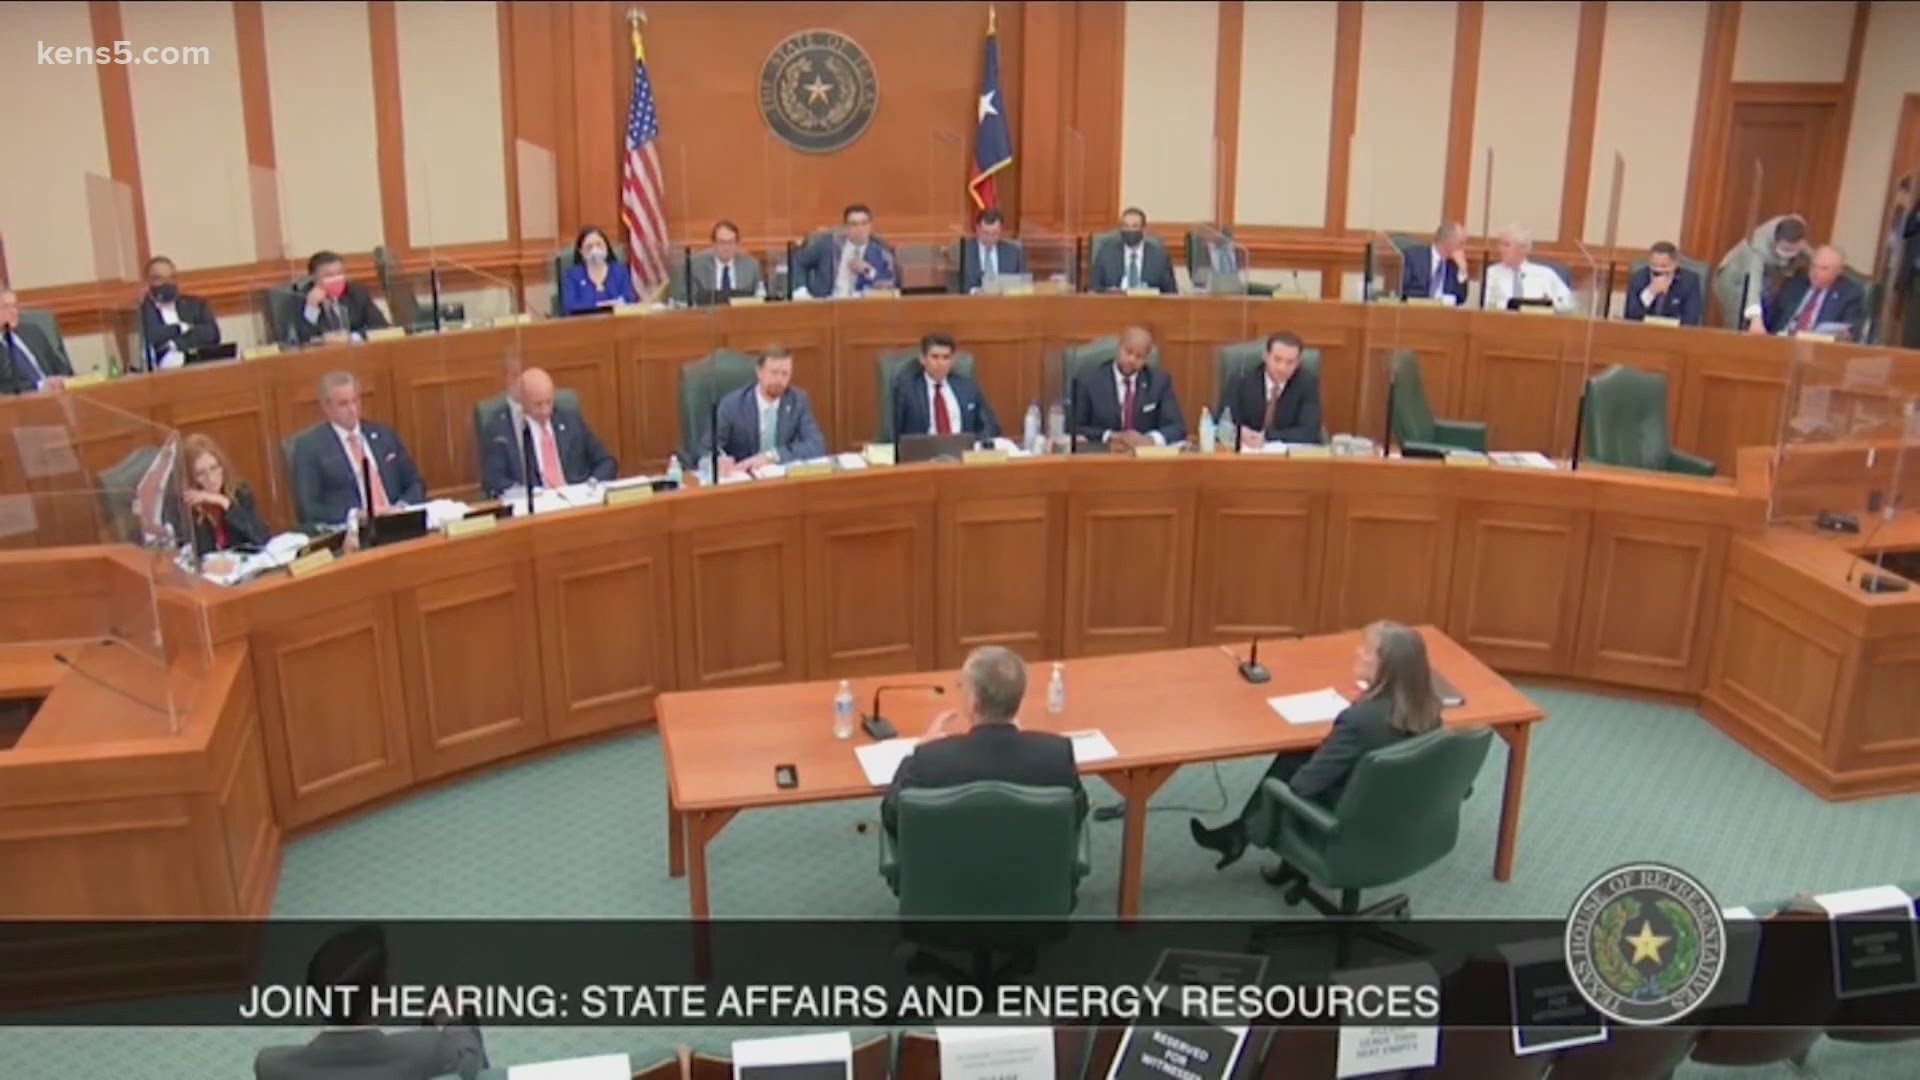 After hours of questions from lawmakers, a clearer picture is starting to form about how Texas landed in a place where millions were without power for hours.